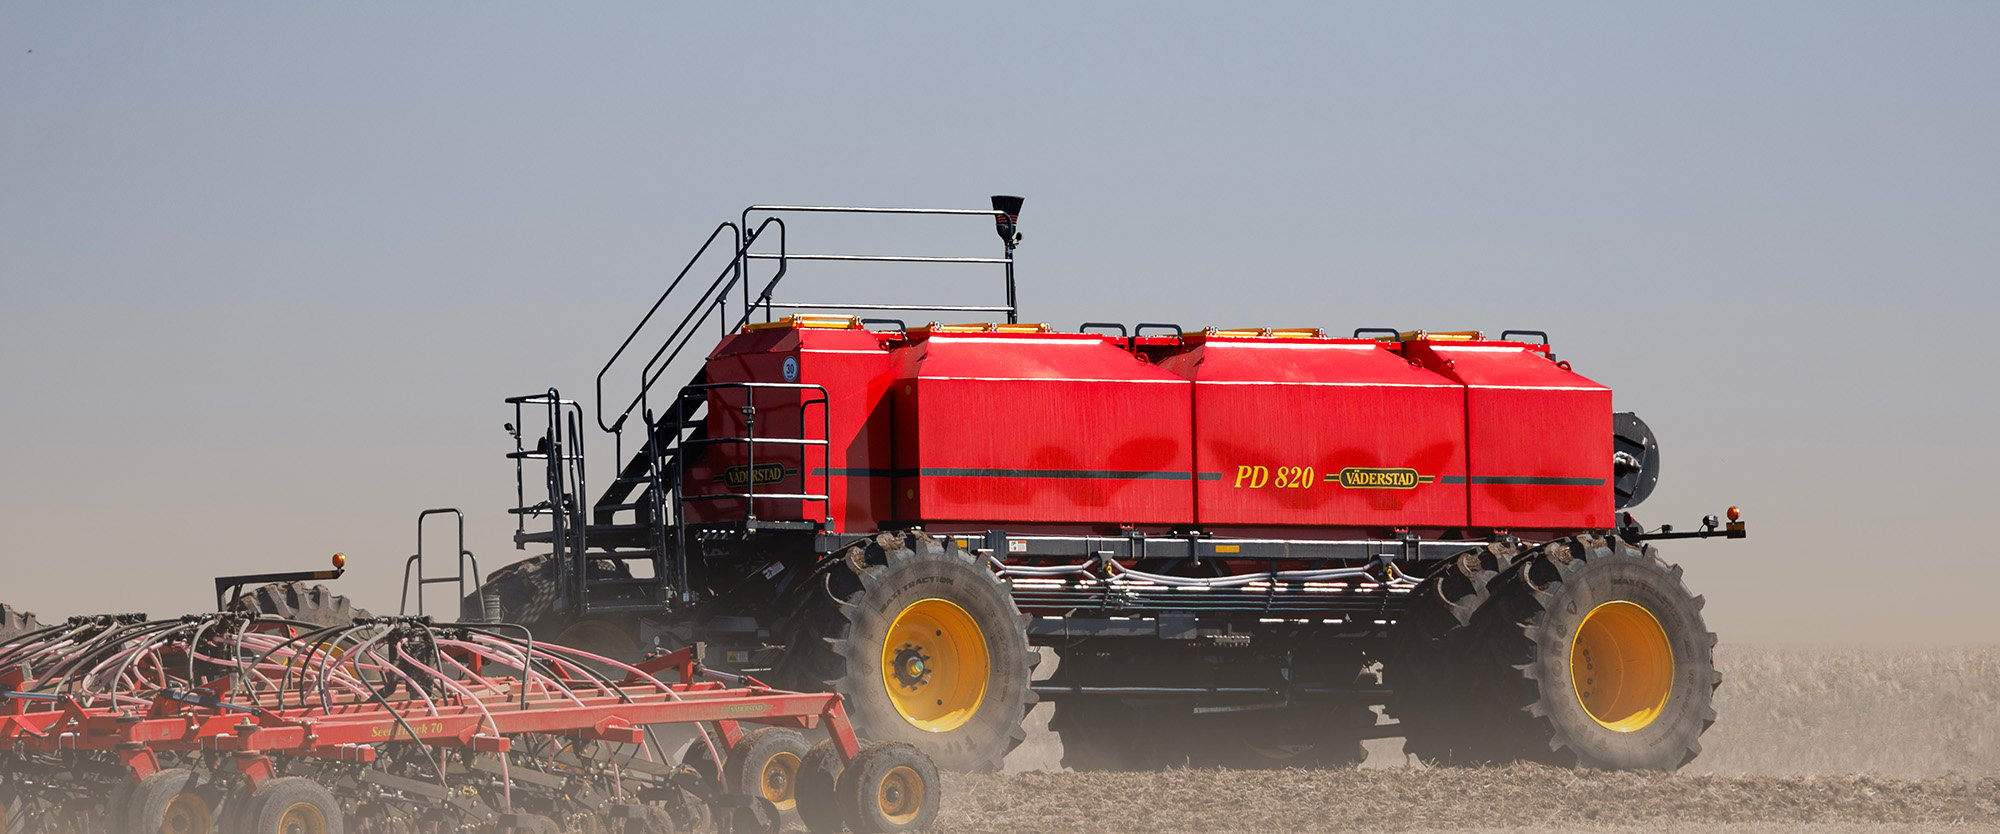 Precision Delivery Air Cart in field